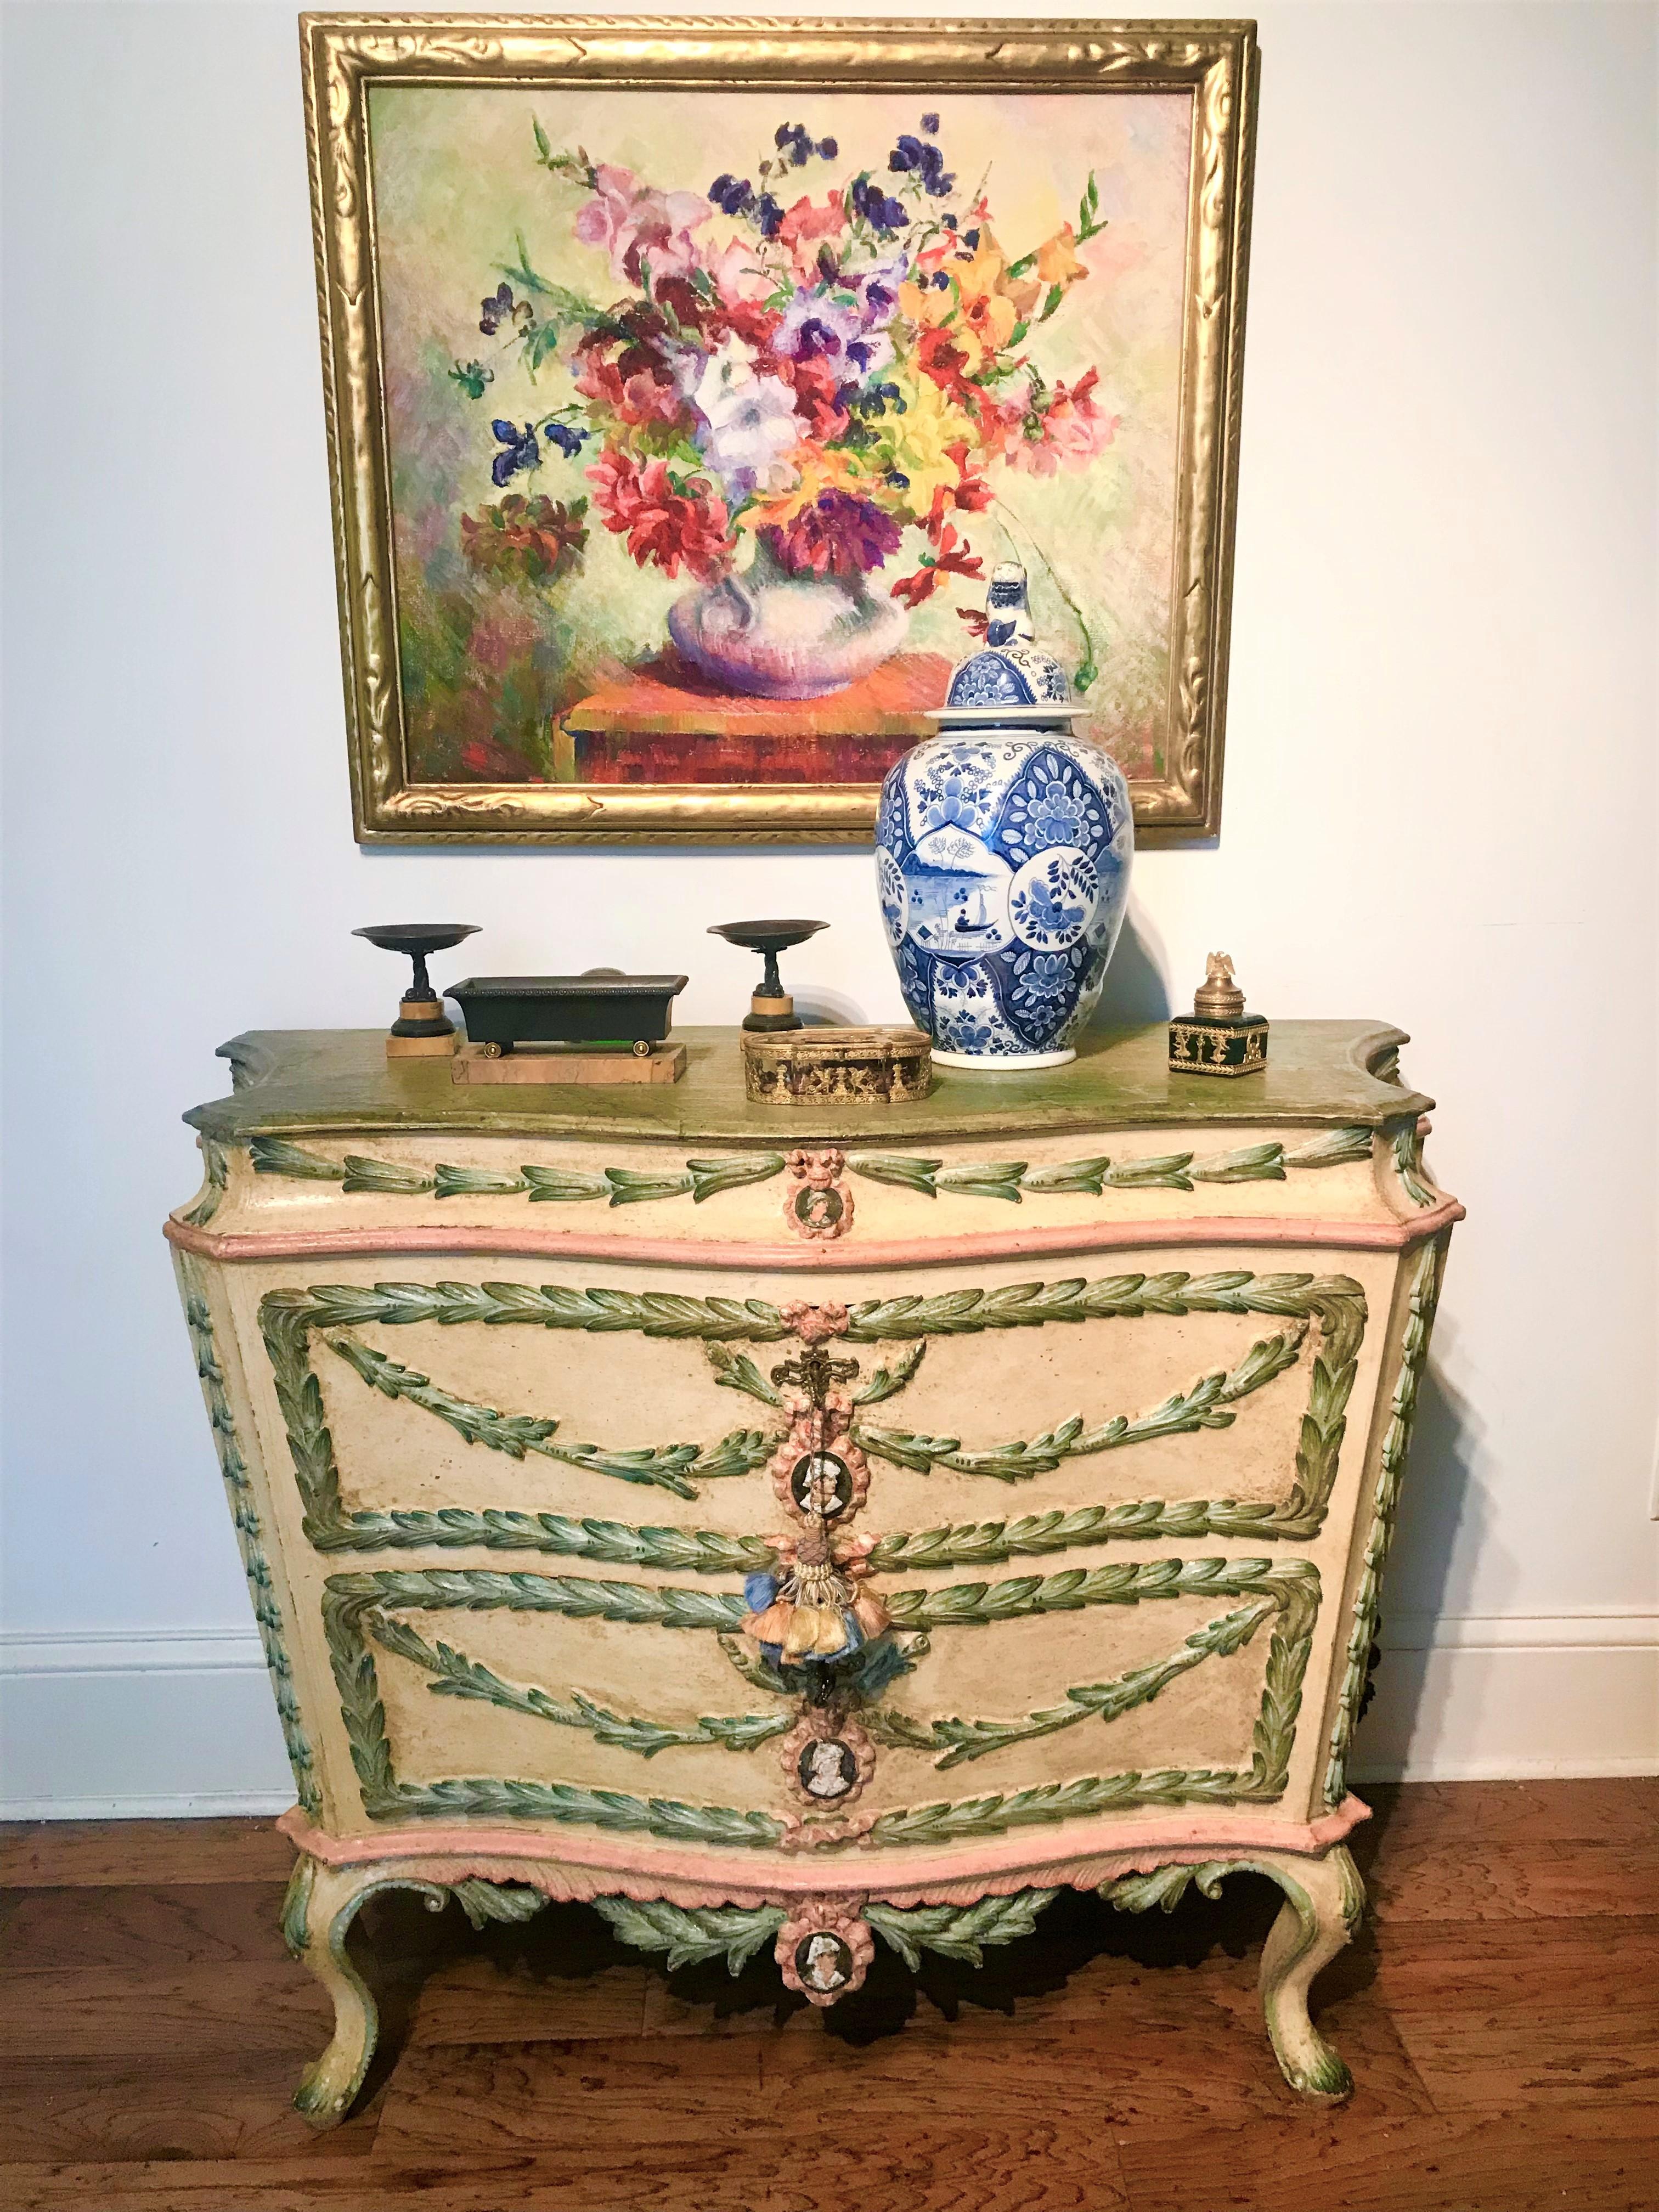 A commode in transitional from rococo to neoclassical style. Most likely custom made to order early to mid 20th century..Presents well and has strong presence. Highly decorative. Heavy and very sturdy .

Decorated with carved in relief foliage as